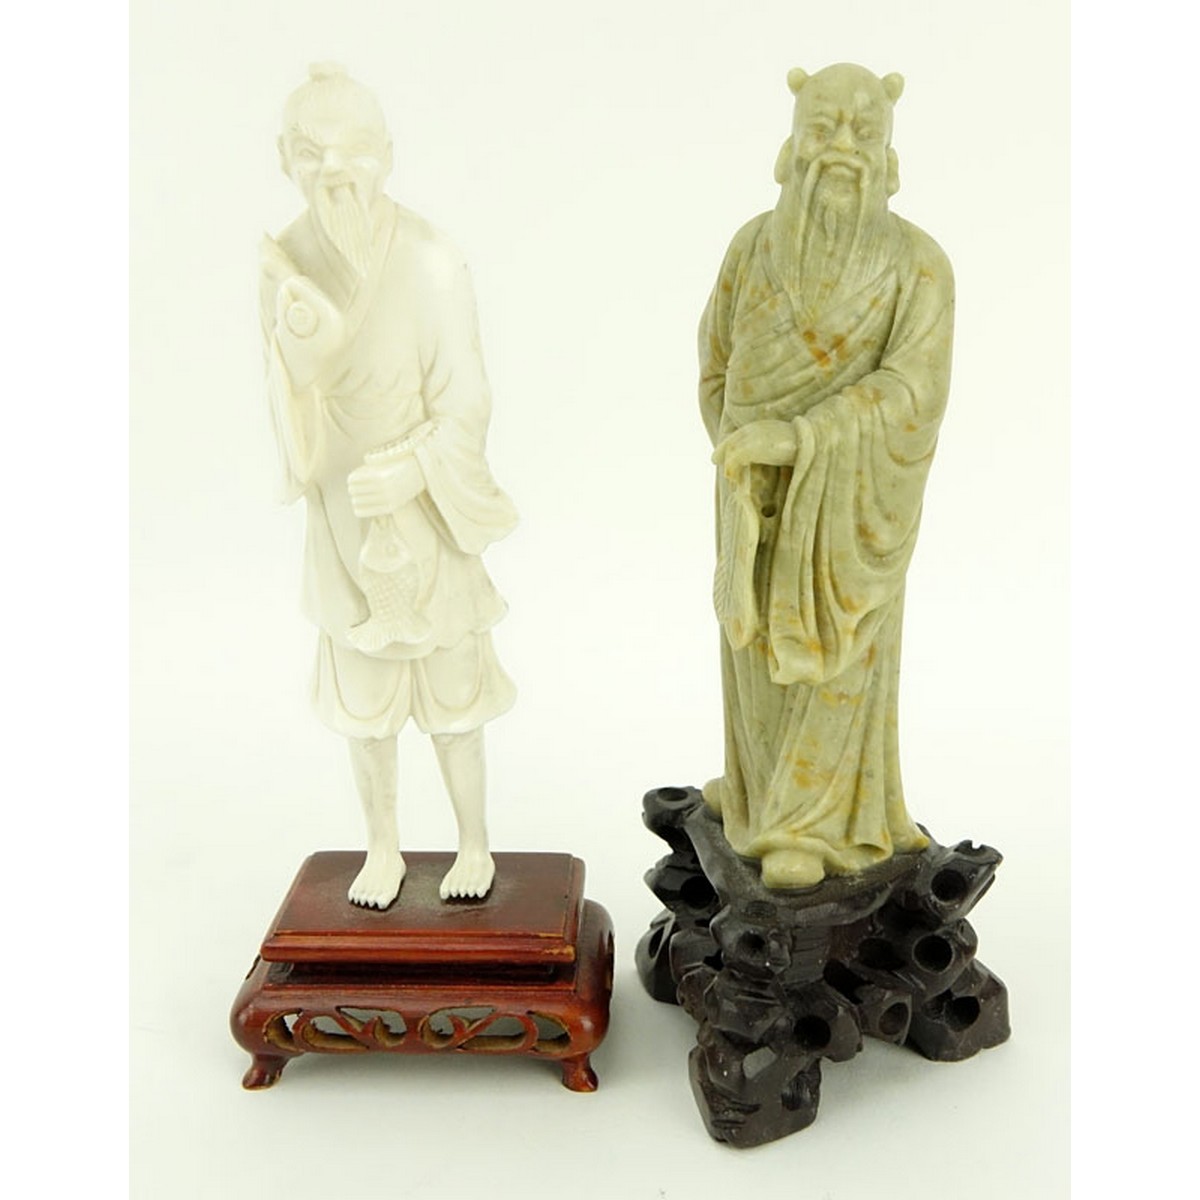 Grouping of Four (4): Pair of Chinese Cloisonne Vases, Chinese Carved Ivory Figurine, and Chinese Soapstone Figurine. Dent to one vase, ivory figure has a small loss to object and to top of the head.